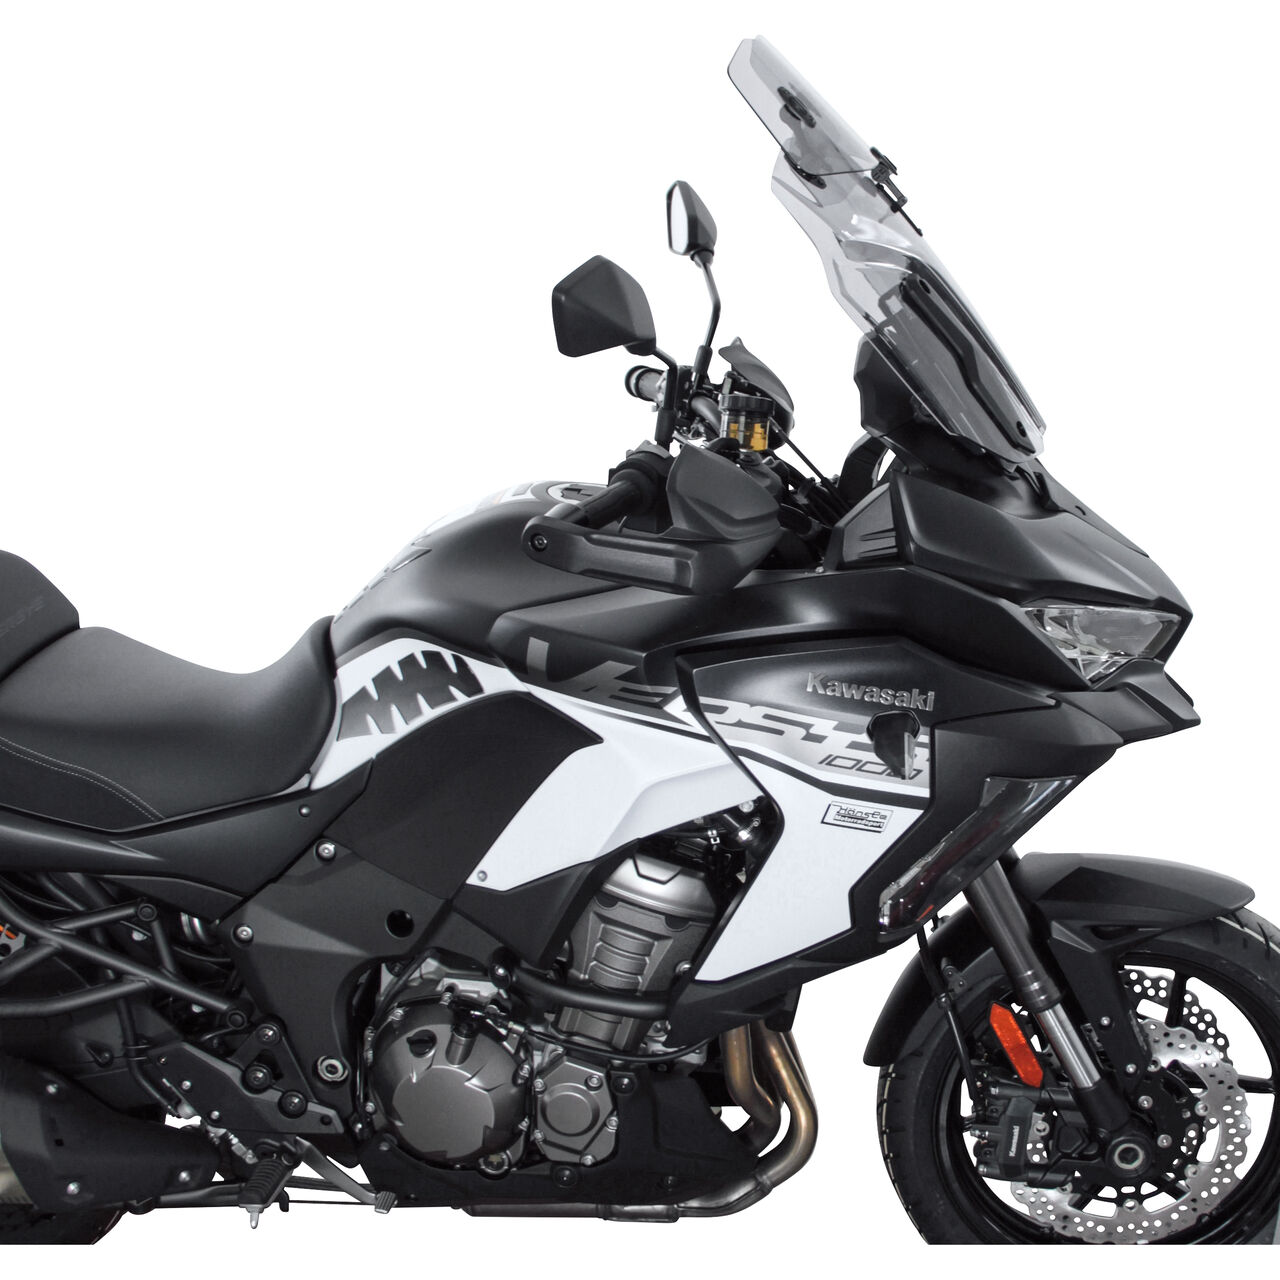 Vario-X-creen windshield VXC tinted for Versys 1000 2019-